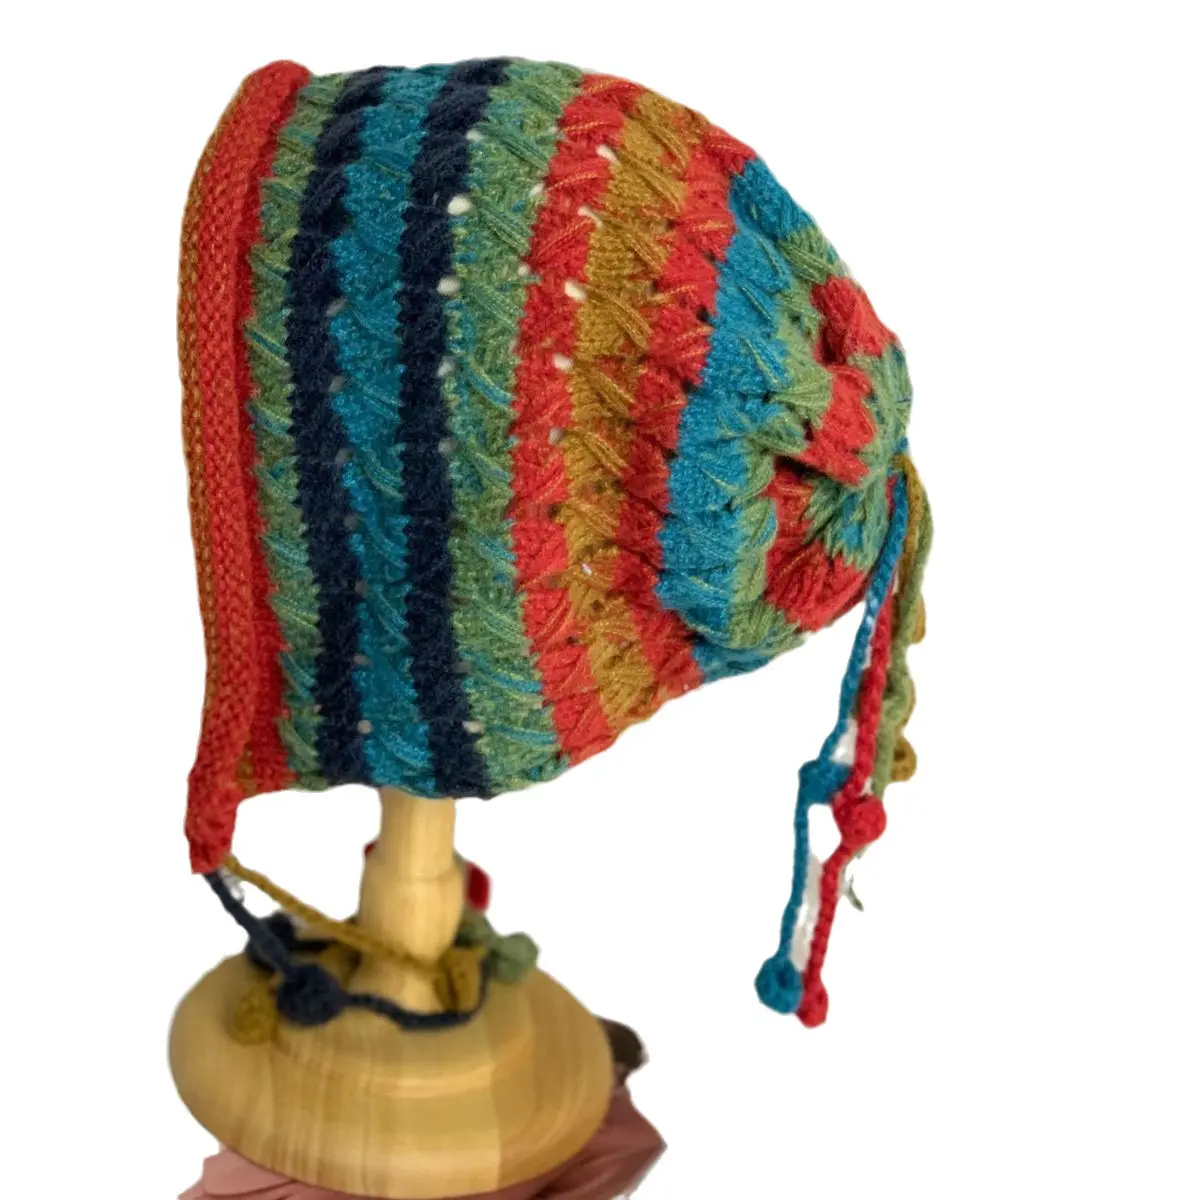 Mano Multicolor Crocheted Splicing Striped Fringe Knit Pullover Beanie Sombreros para mujeres